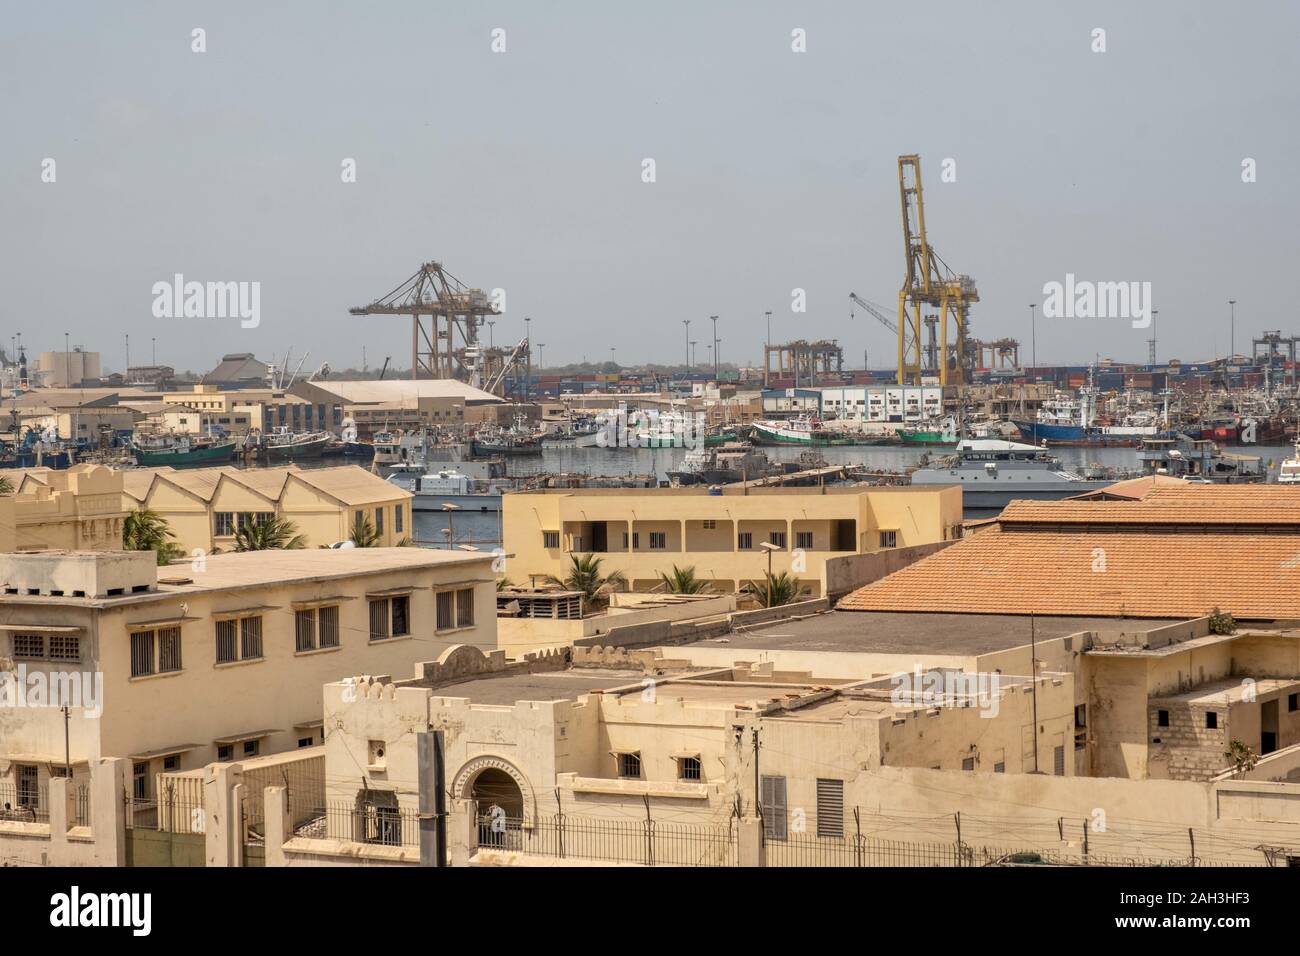 A view over the rooftops of the Autonomous Port of Dakar, Senegal, one of the largest ports in West Africa. Stock Photo